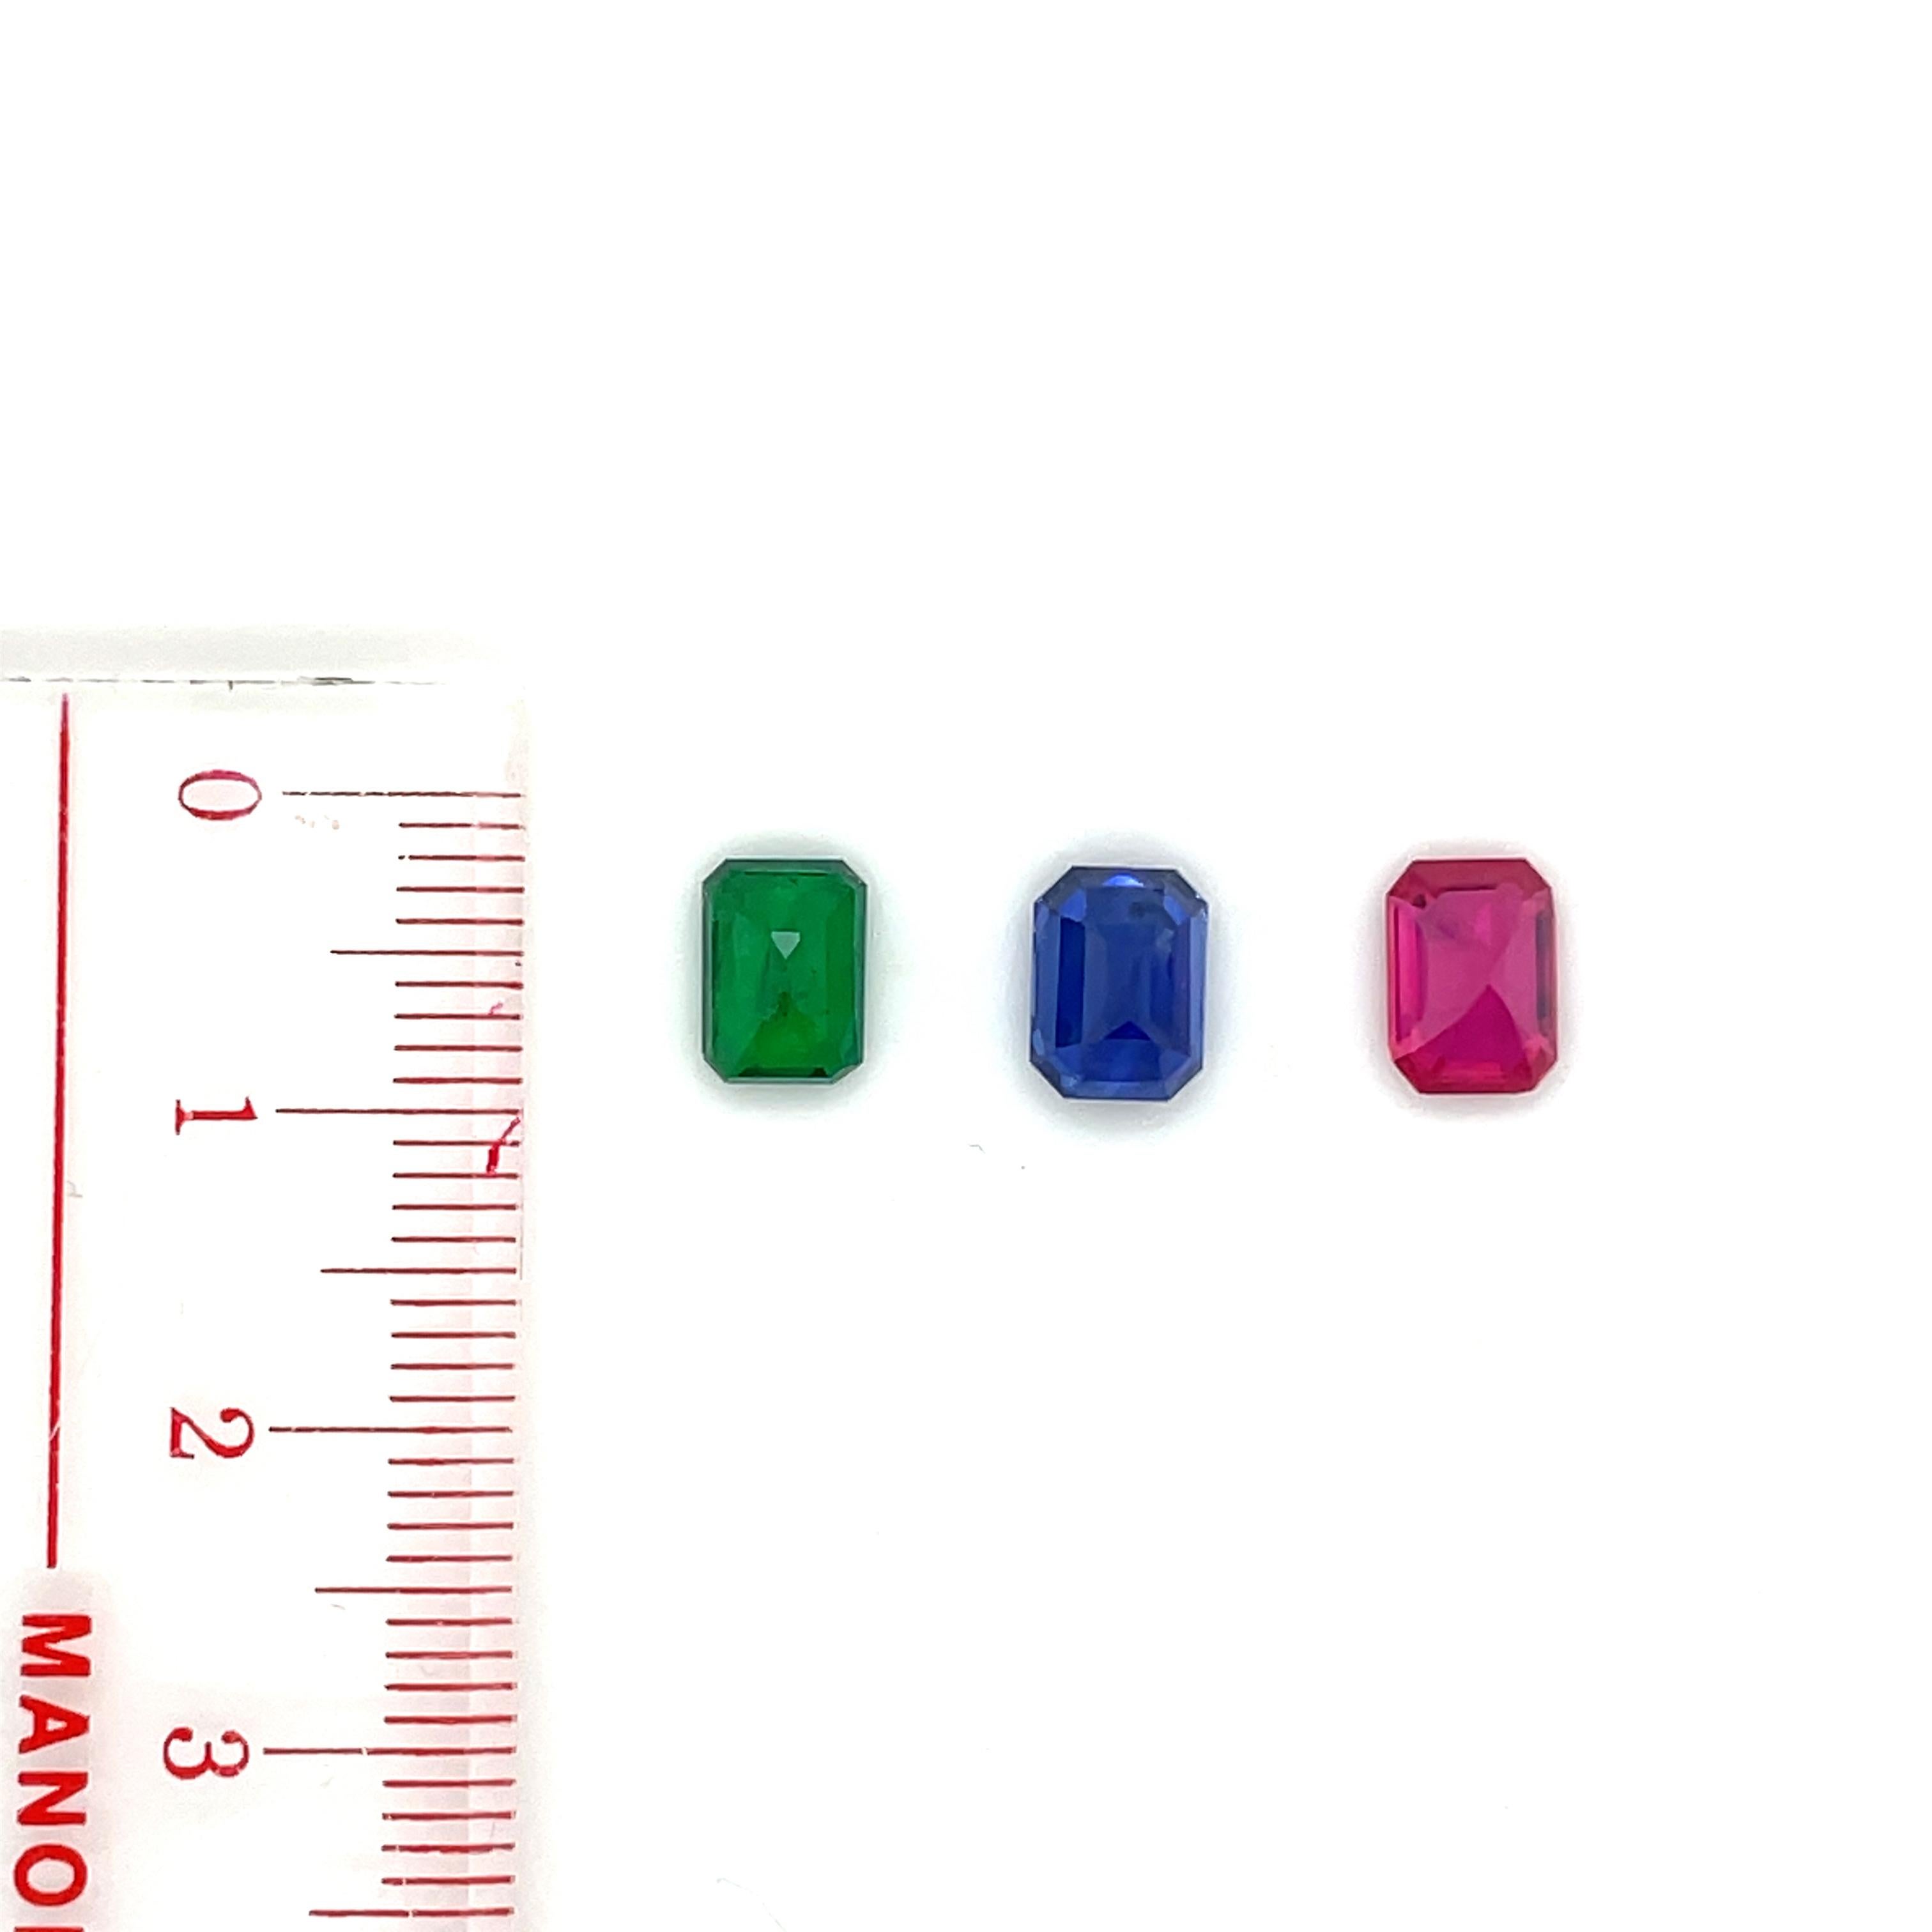 Emerald-Cut Ruby Cts 1.31 and Blue Sapphire Cts 2.16 and Emerald Cts 0.92 Loose  For Sale 7